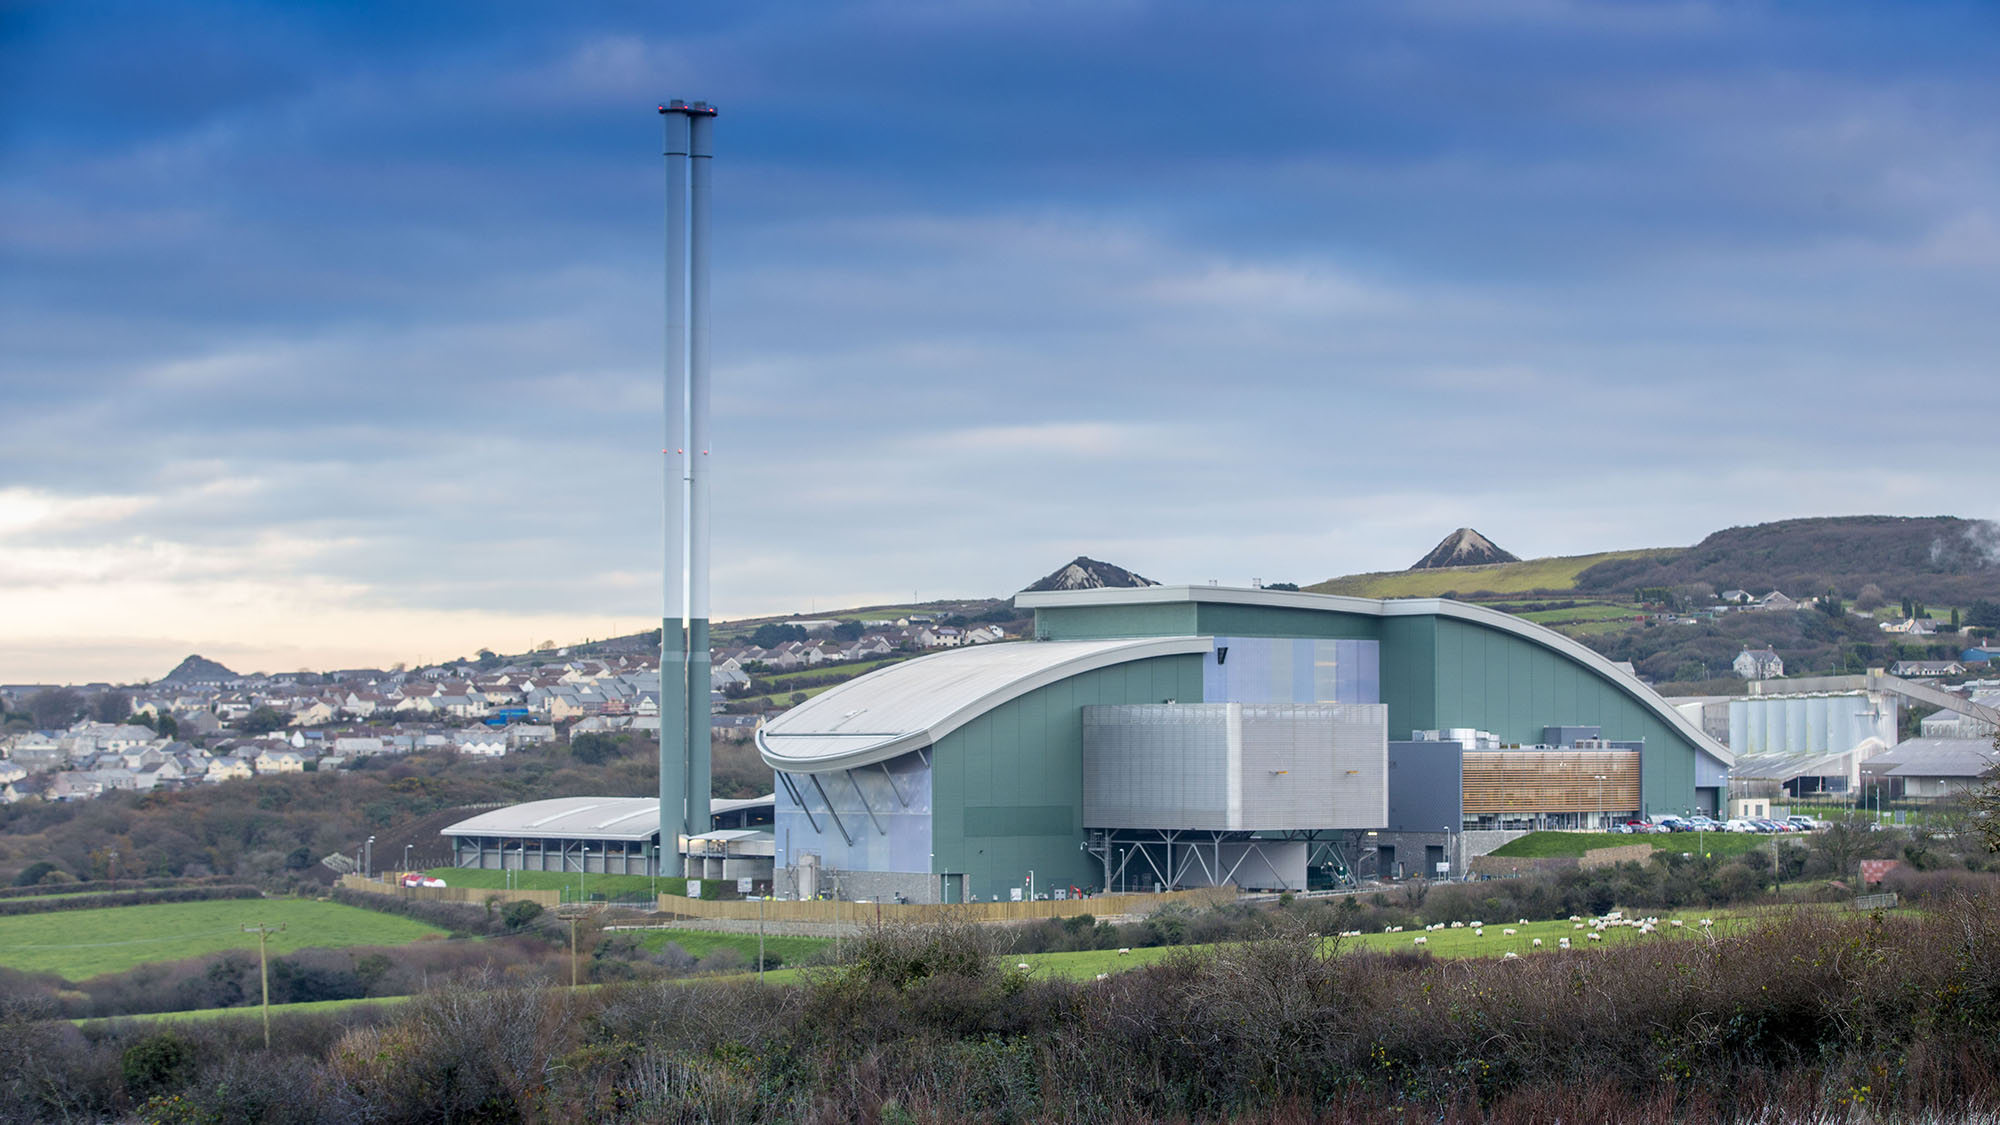 Cornwall energy recovery centre